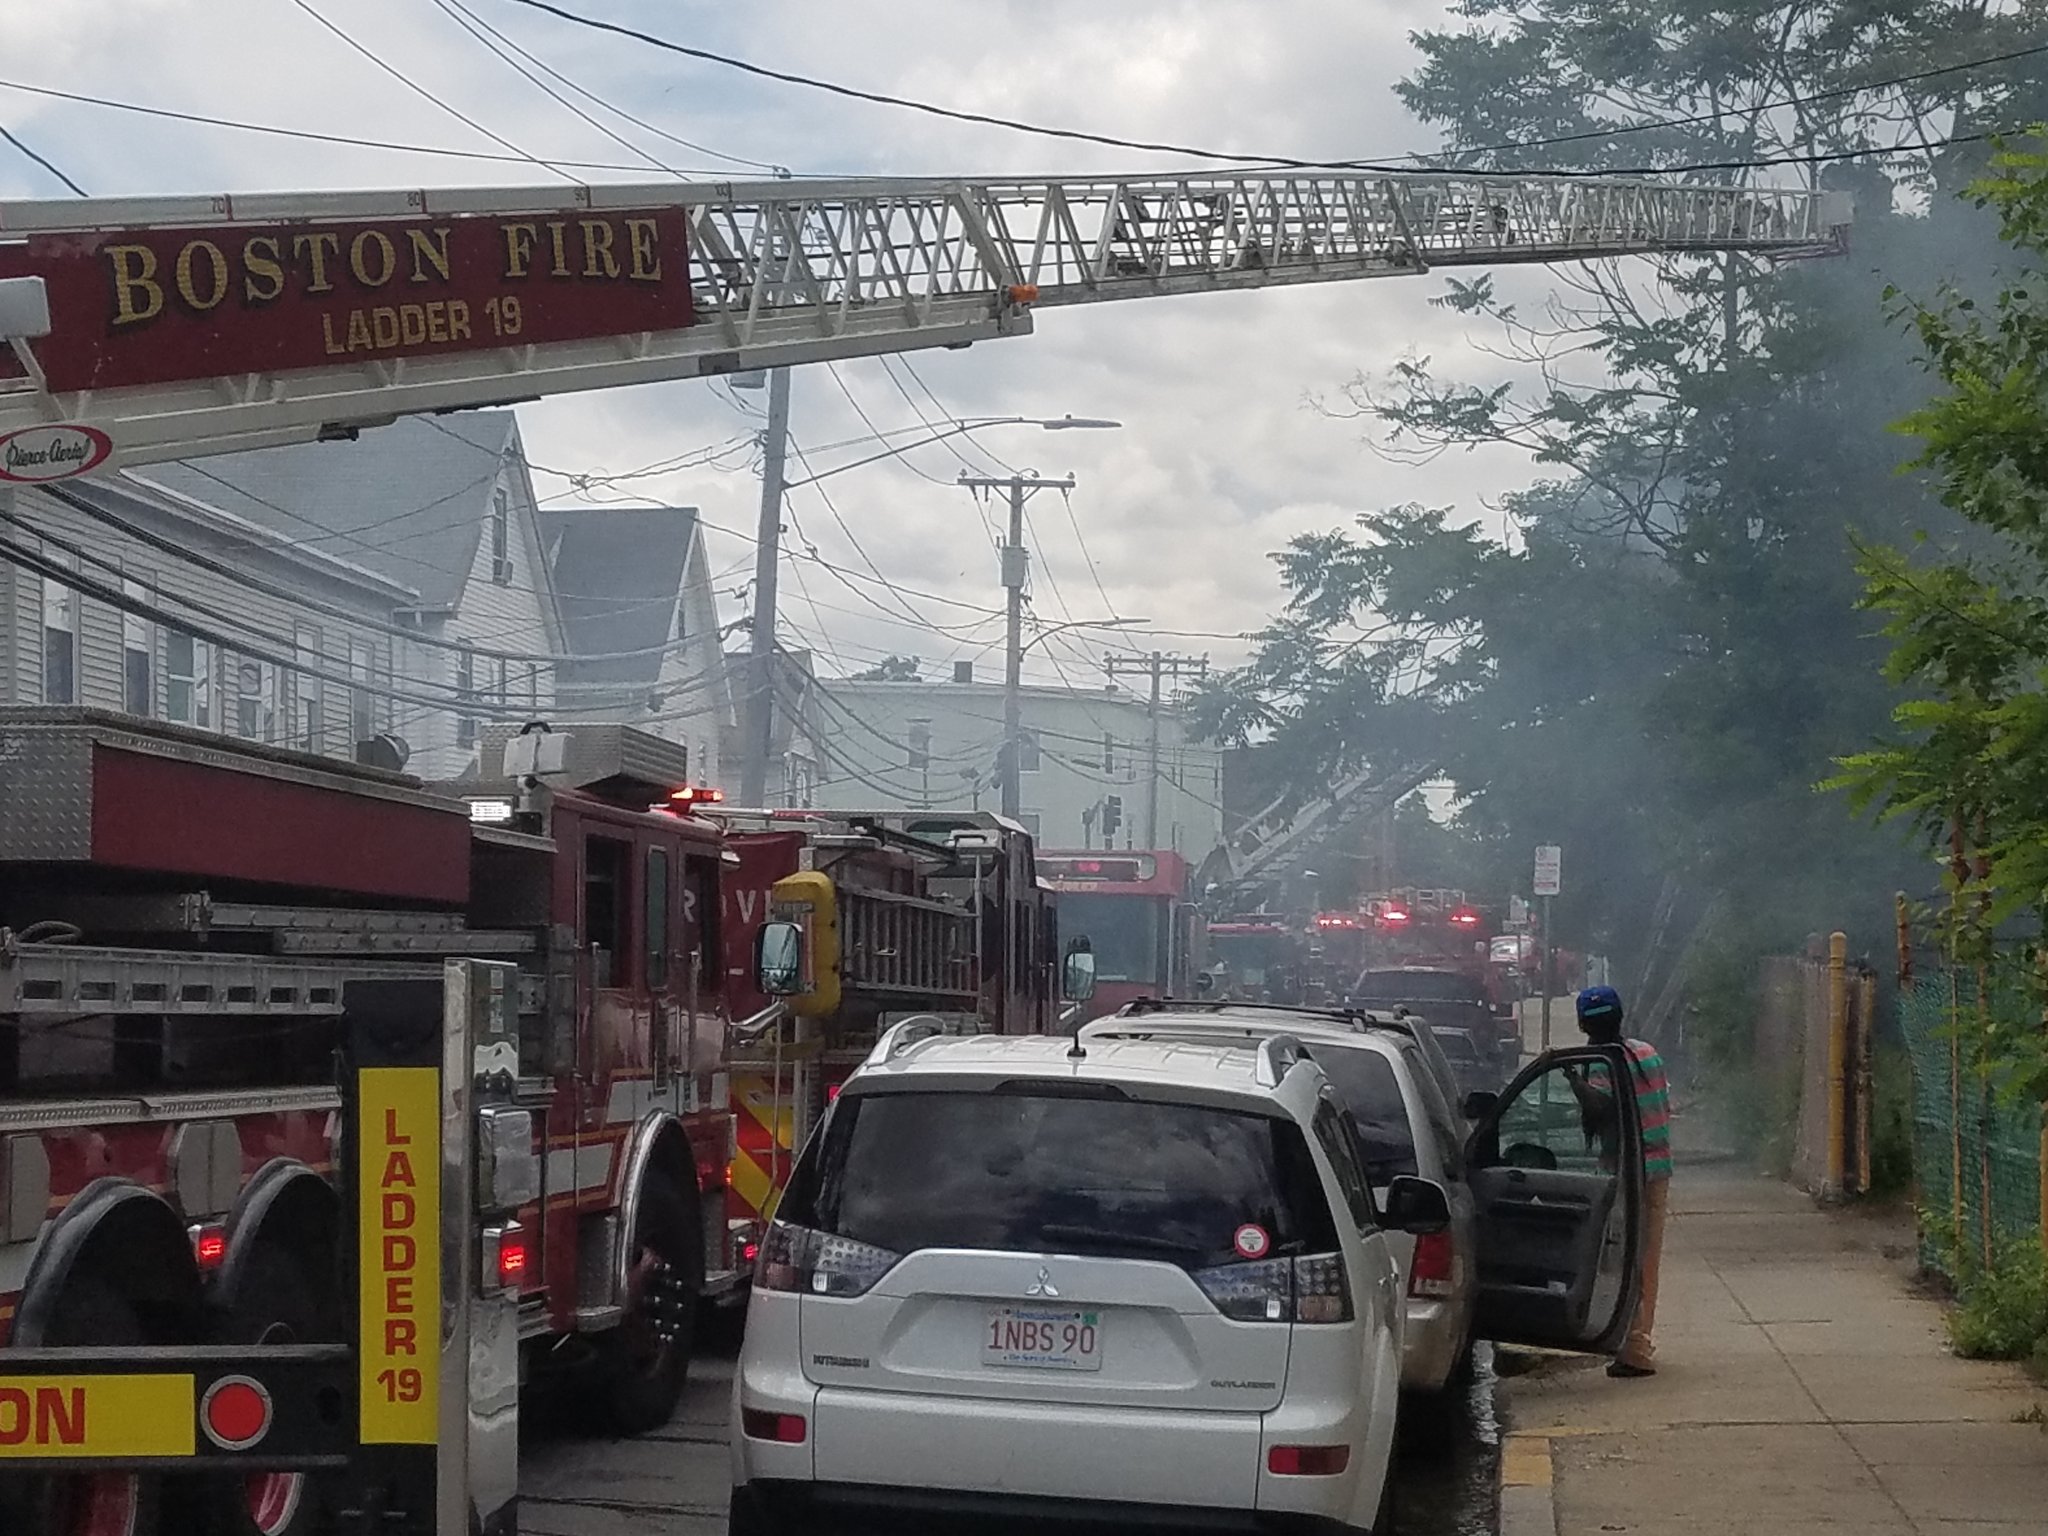 93 Park St. fire in Dorchester